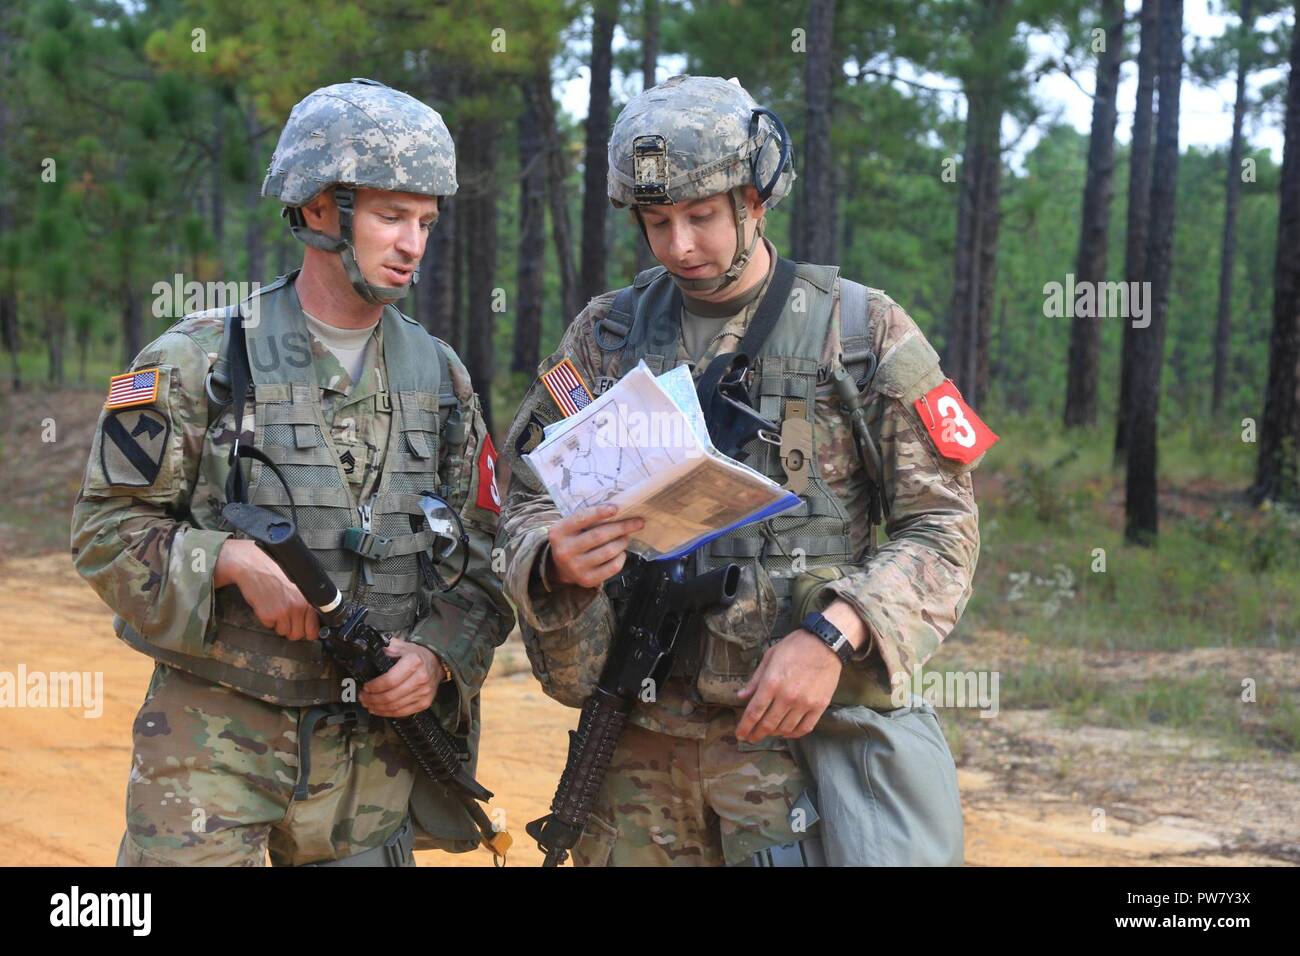 U.S. Army Sgt. 1st Class Zachary Dispennette and Sgt. Christopher Faulkner, both assigned to the McDonald Army Health Center, discuss a plan during the 2017 Best Medic Competition at Fort Bragg, N.C., Sep. 18-21, 2017. The competition tested the physical and mental toughness, as well as the technical competence, of each medic to identify the team moving forward to represent the region at the next level of the competition. Stock Photo